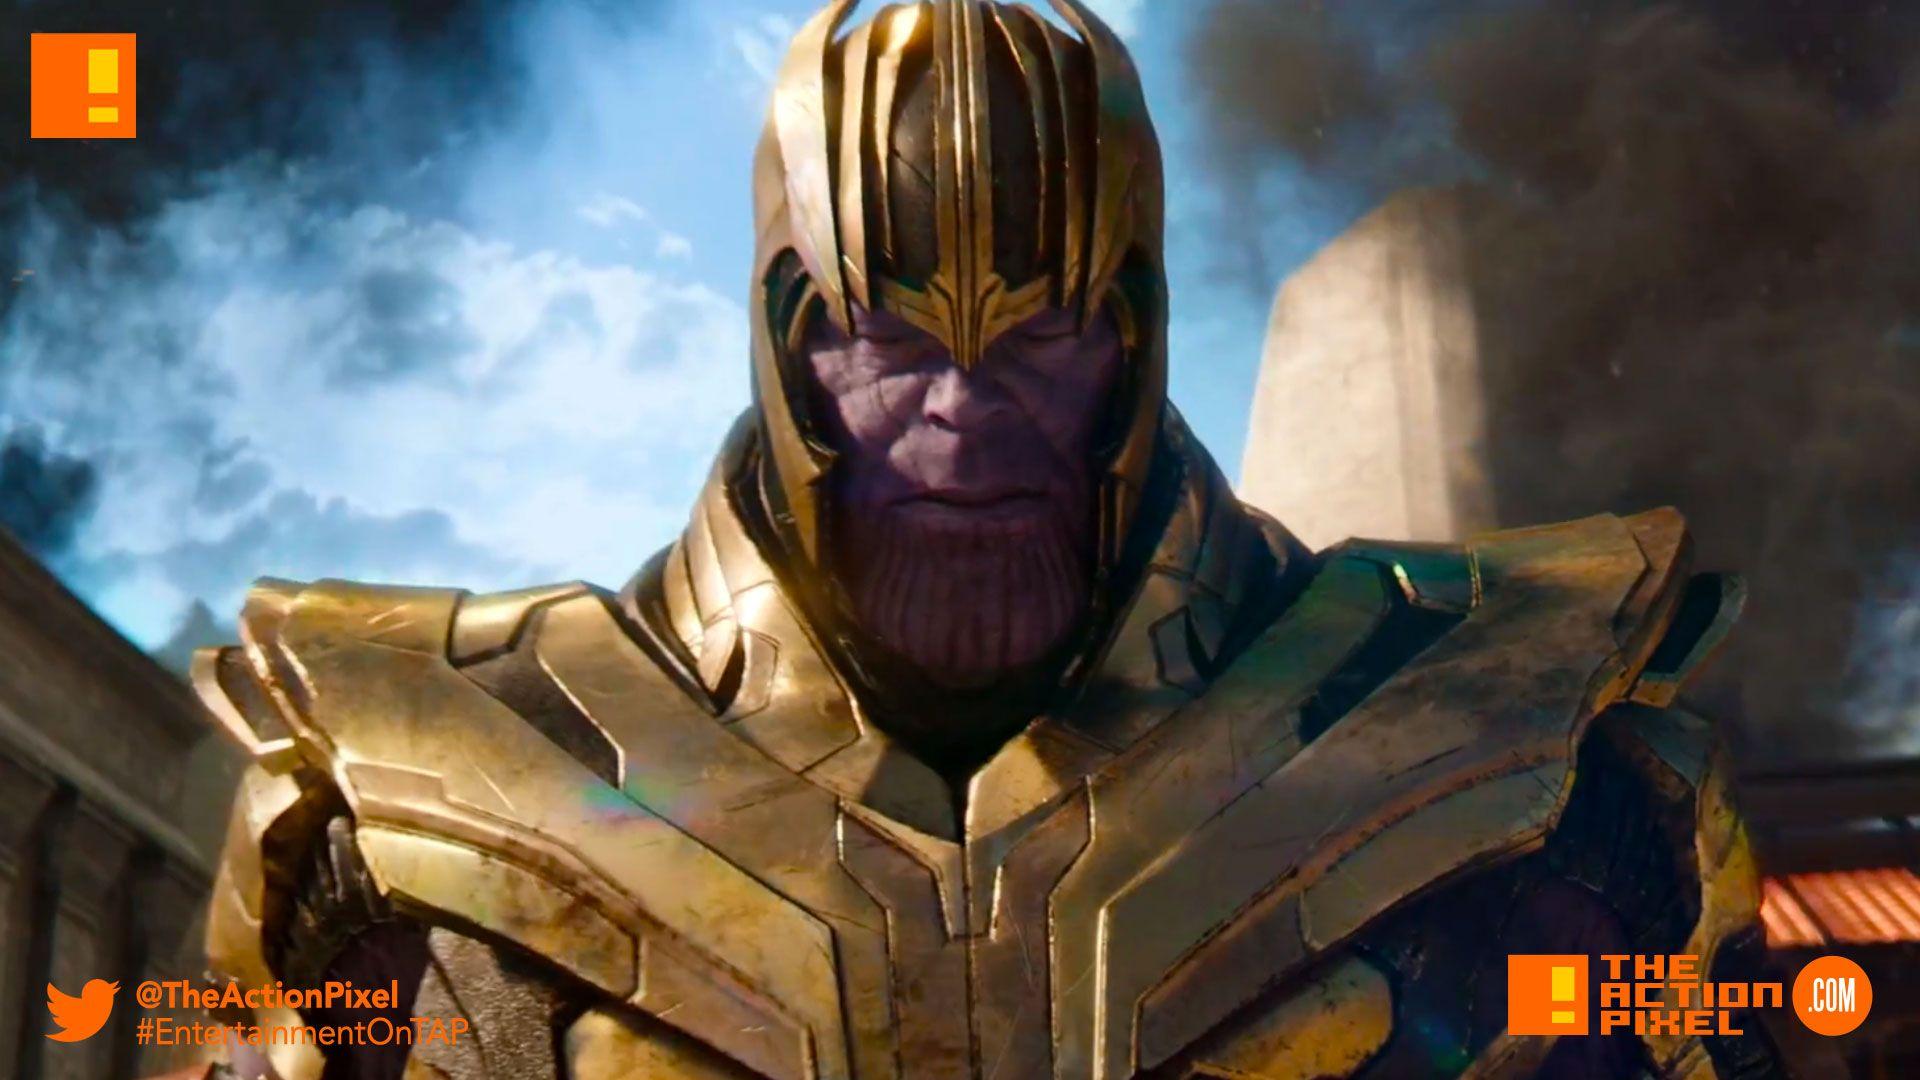 Thanos' grande schemes of an ethnic culling takes fruition in